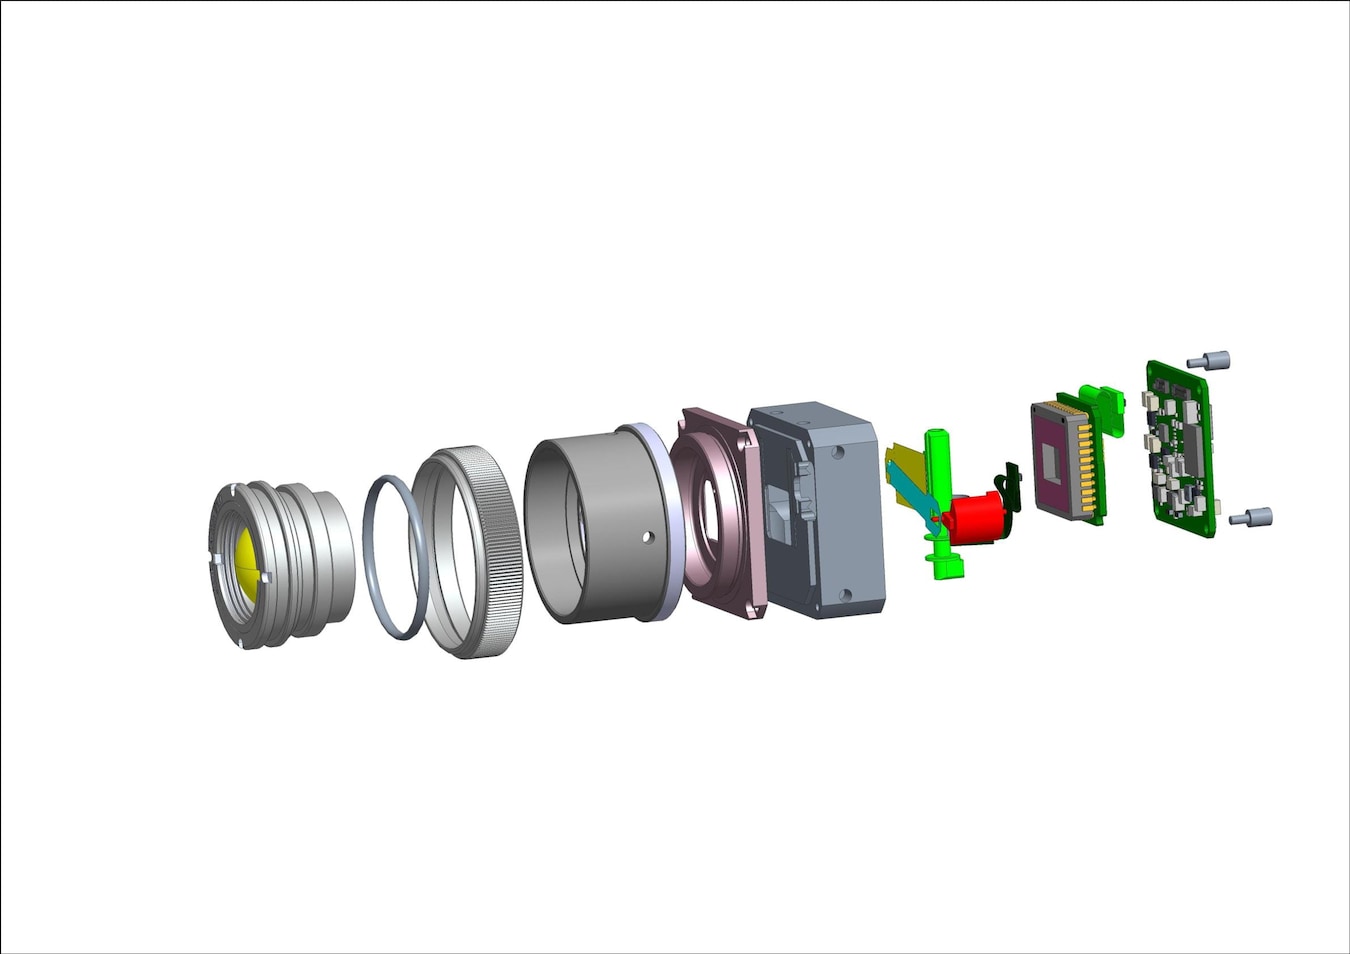 Thermal imaging camera exploded view